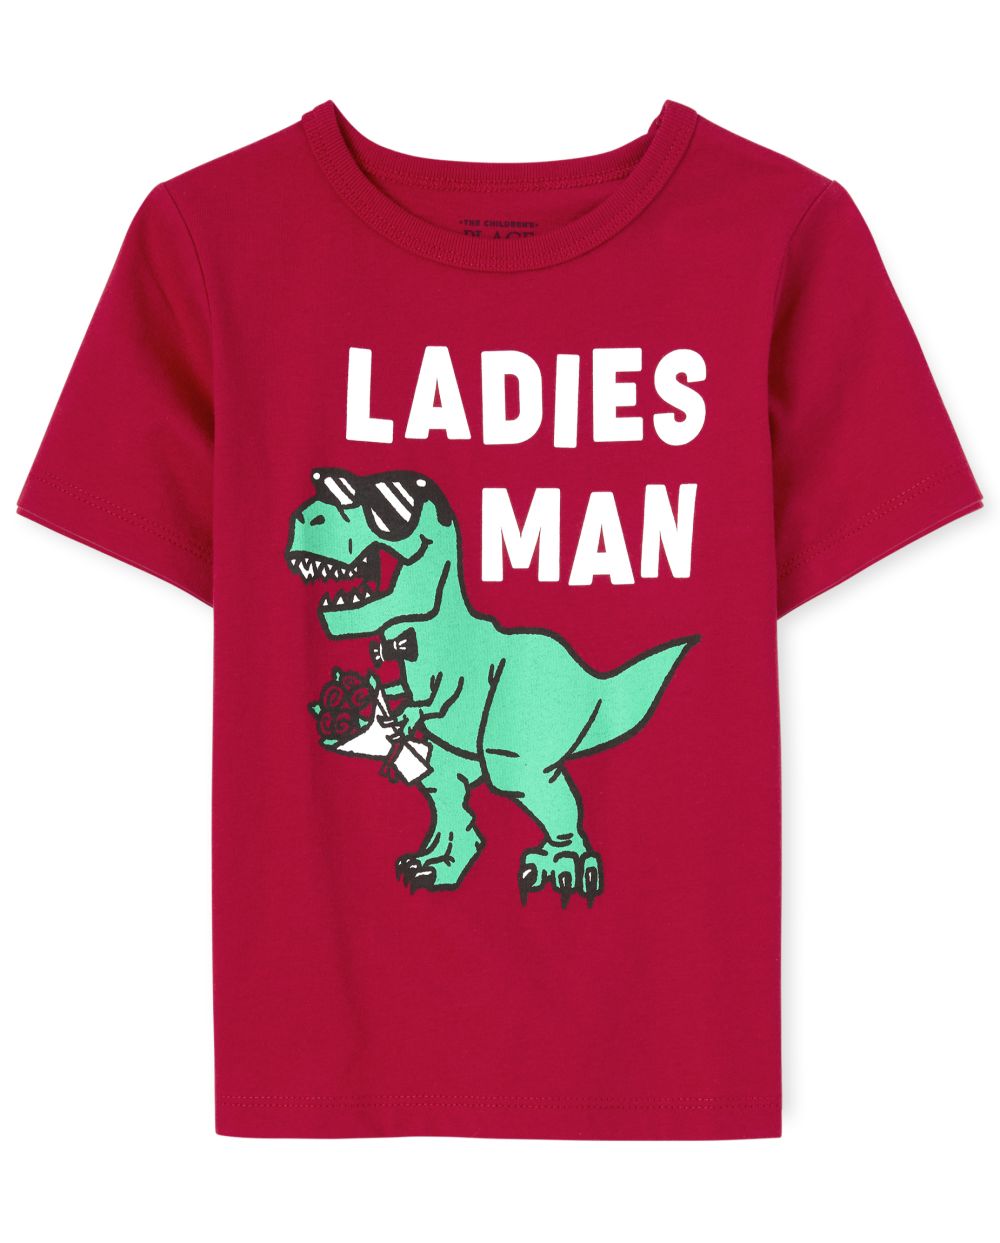 

s Baby And Toddler Boys Ladies Man Graphic Tee - Red T-Shirt - The Children's Place